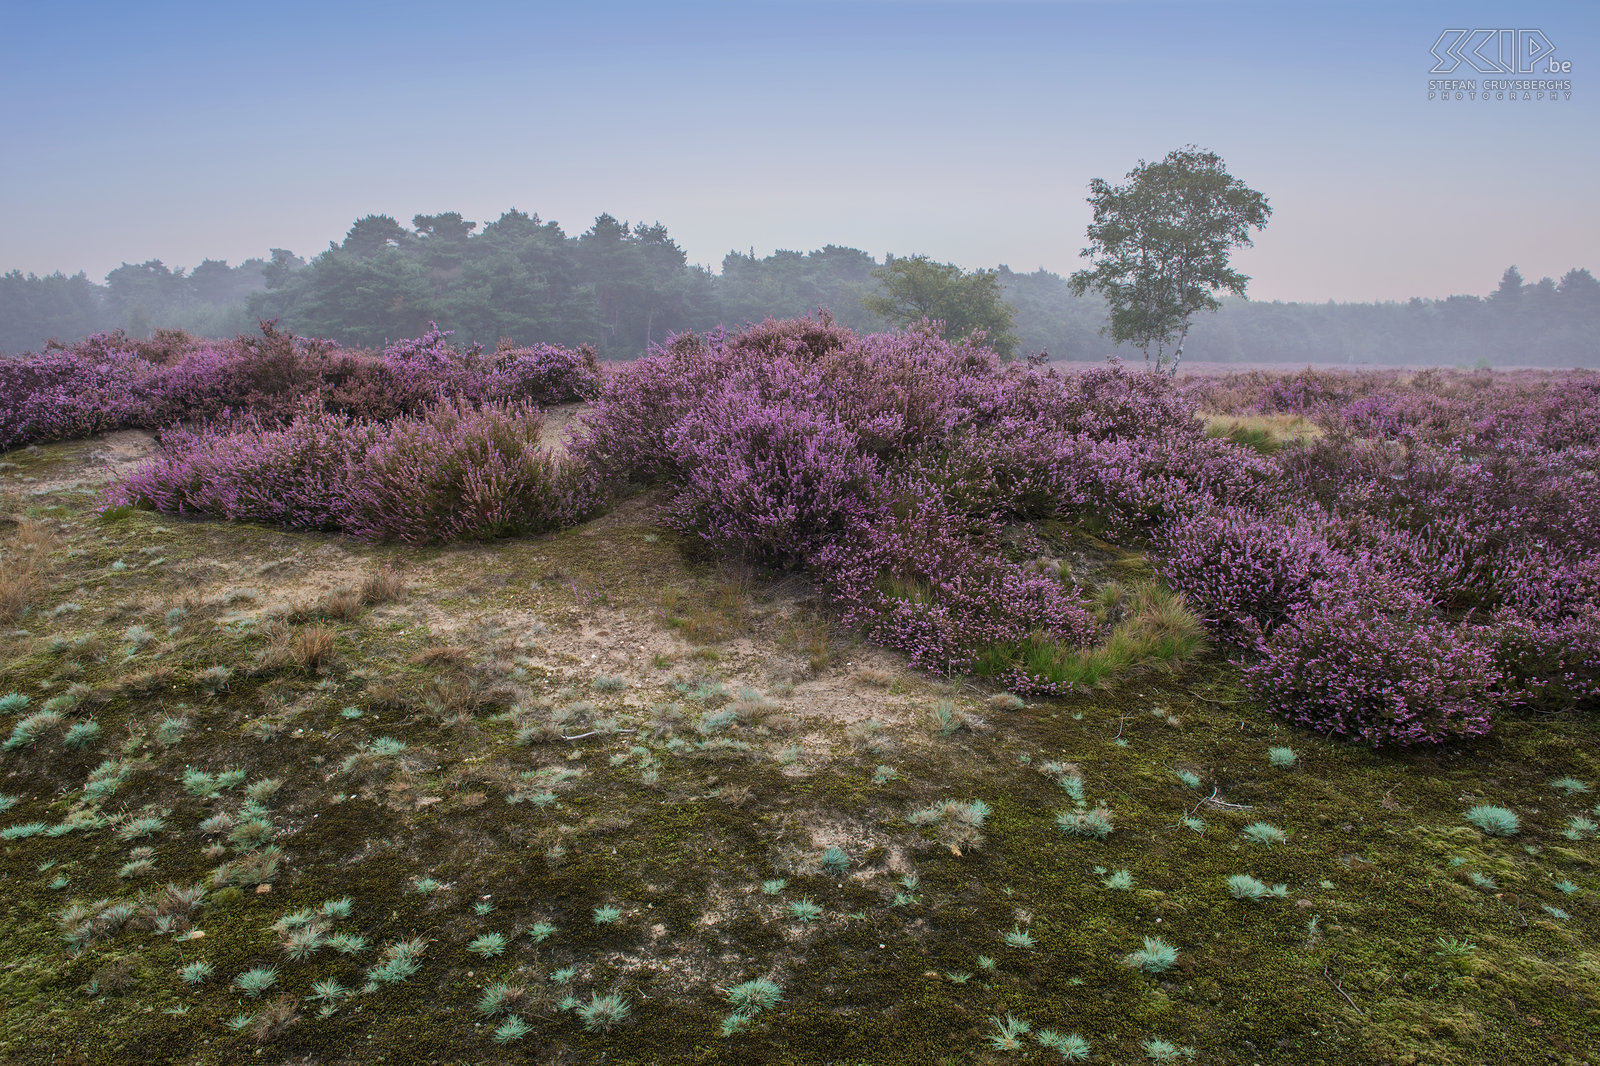 Blooming heathland - Heuvelse heide The most interesting time for landscape photographers in my home region the Kempen is definitely the blooming period of the heather in late August. This year it was a two weeks earlier than other years. I woke up early multiple times to photograph the sunrise at the heathlands of the Blekerheide and the Heuvelse heide in my hometown Lommel.<br />
 Stefan Cruysberghs